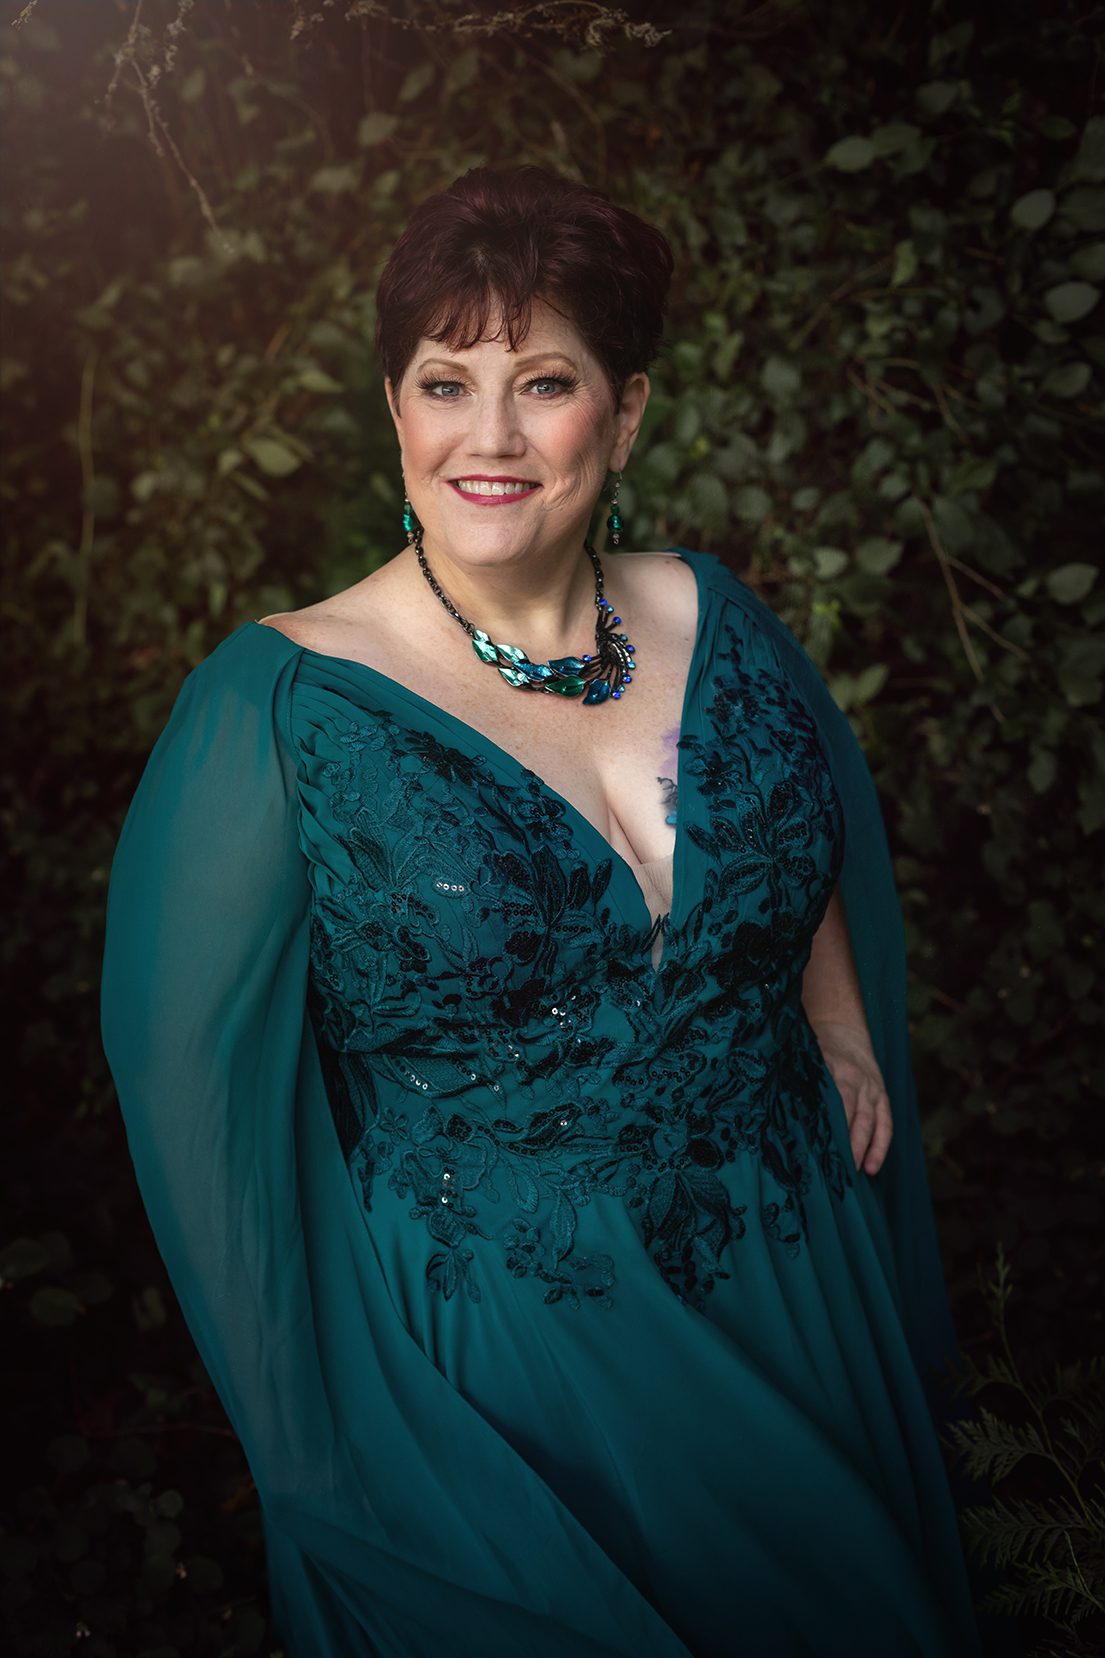 plus size women in her 50s with gown in woods western washington state